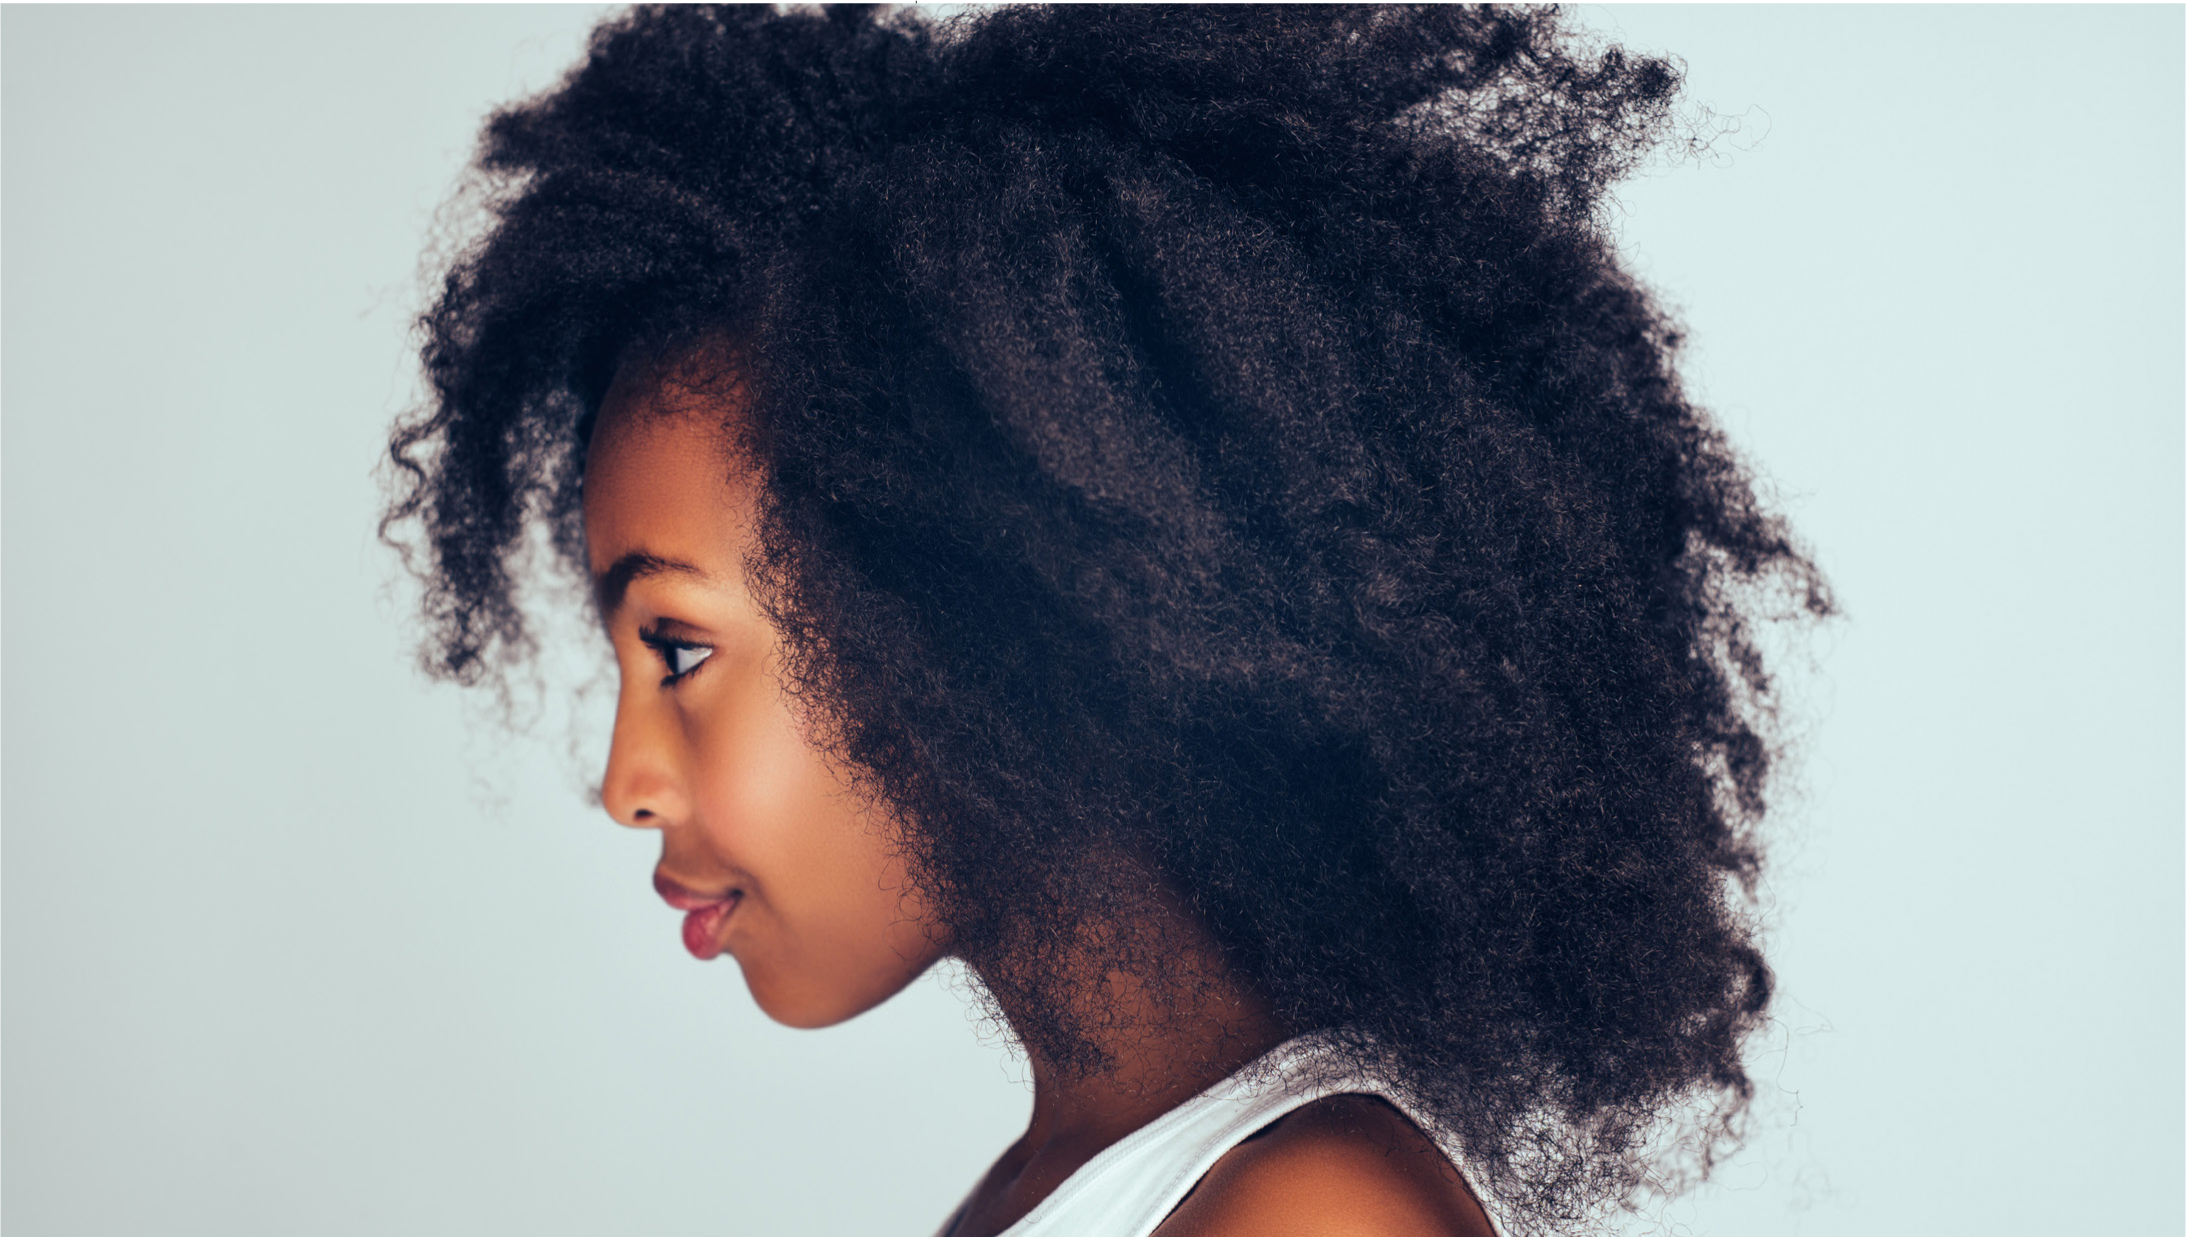 Journal of Aesthetic Nursing - Treating Afro hair loss: signs, symptoms and  specialist interest